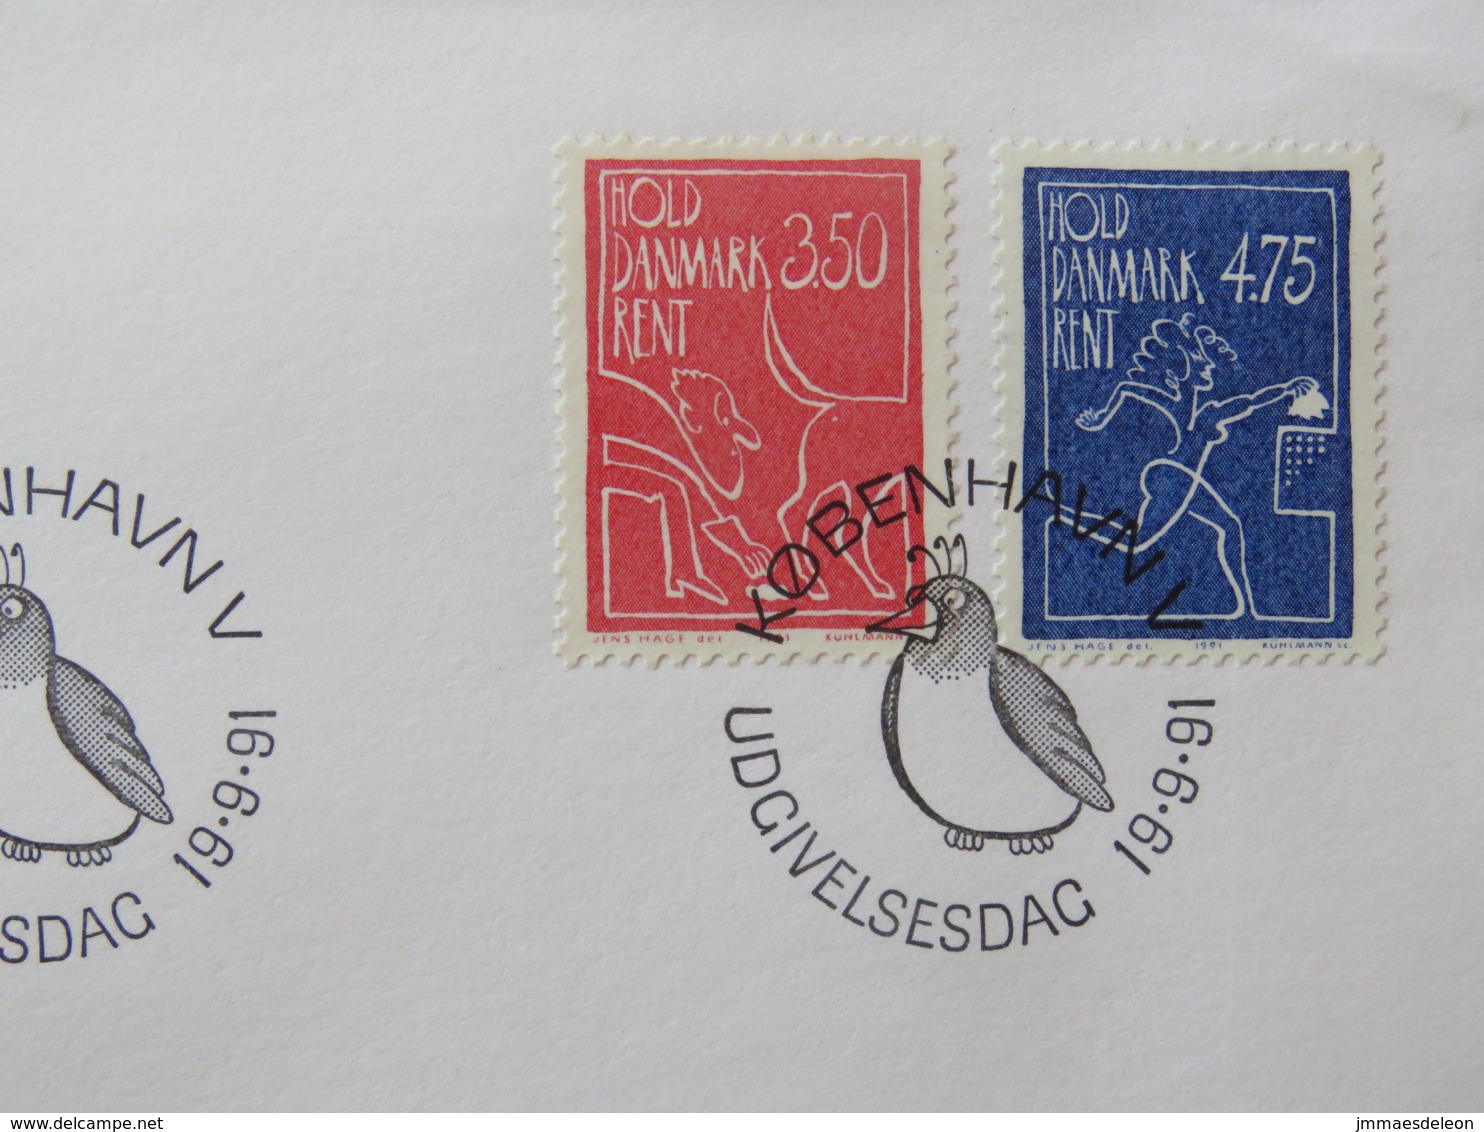 Denmark 1991 FDC Cover - Cleaning Dog Poop - Garbage - Bird - Storia Postale